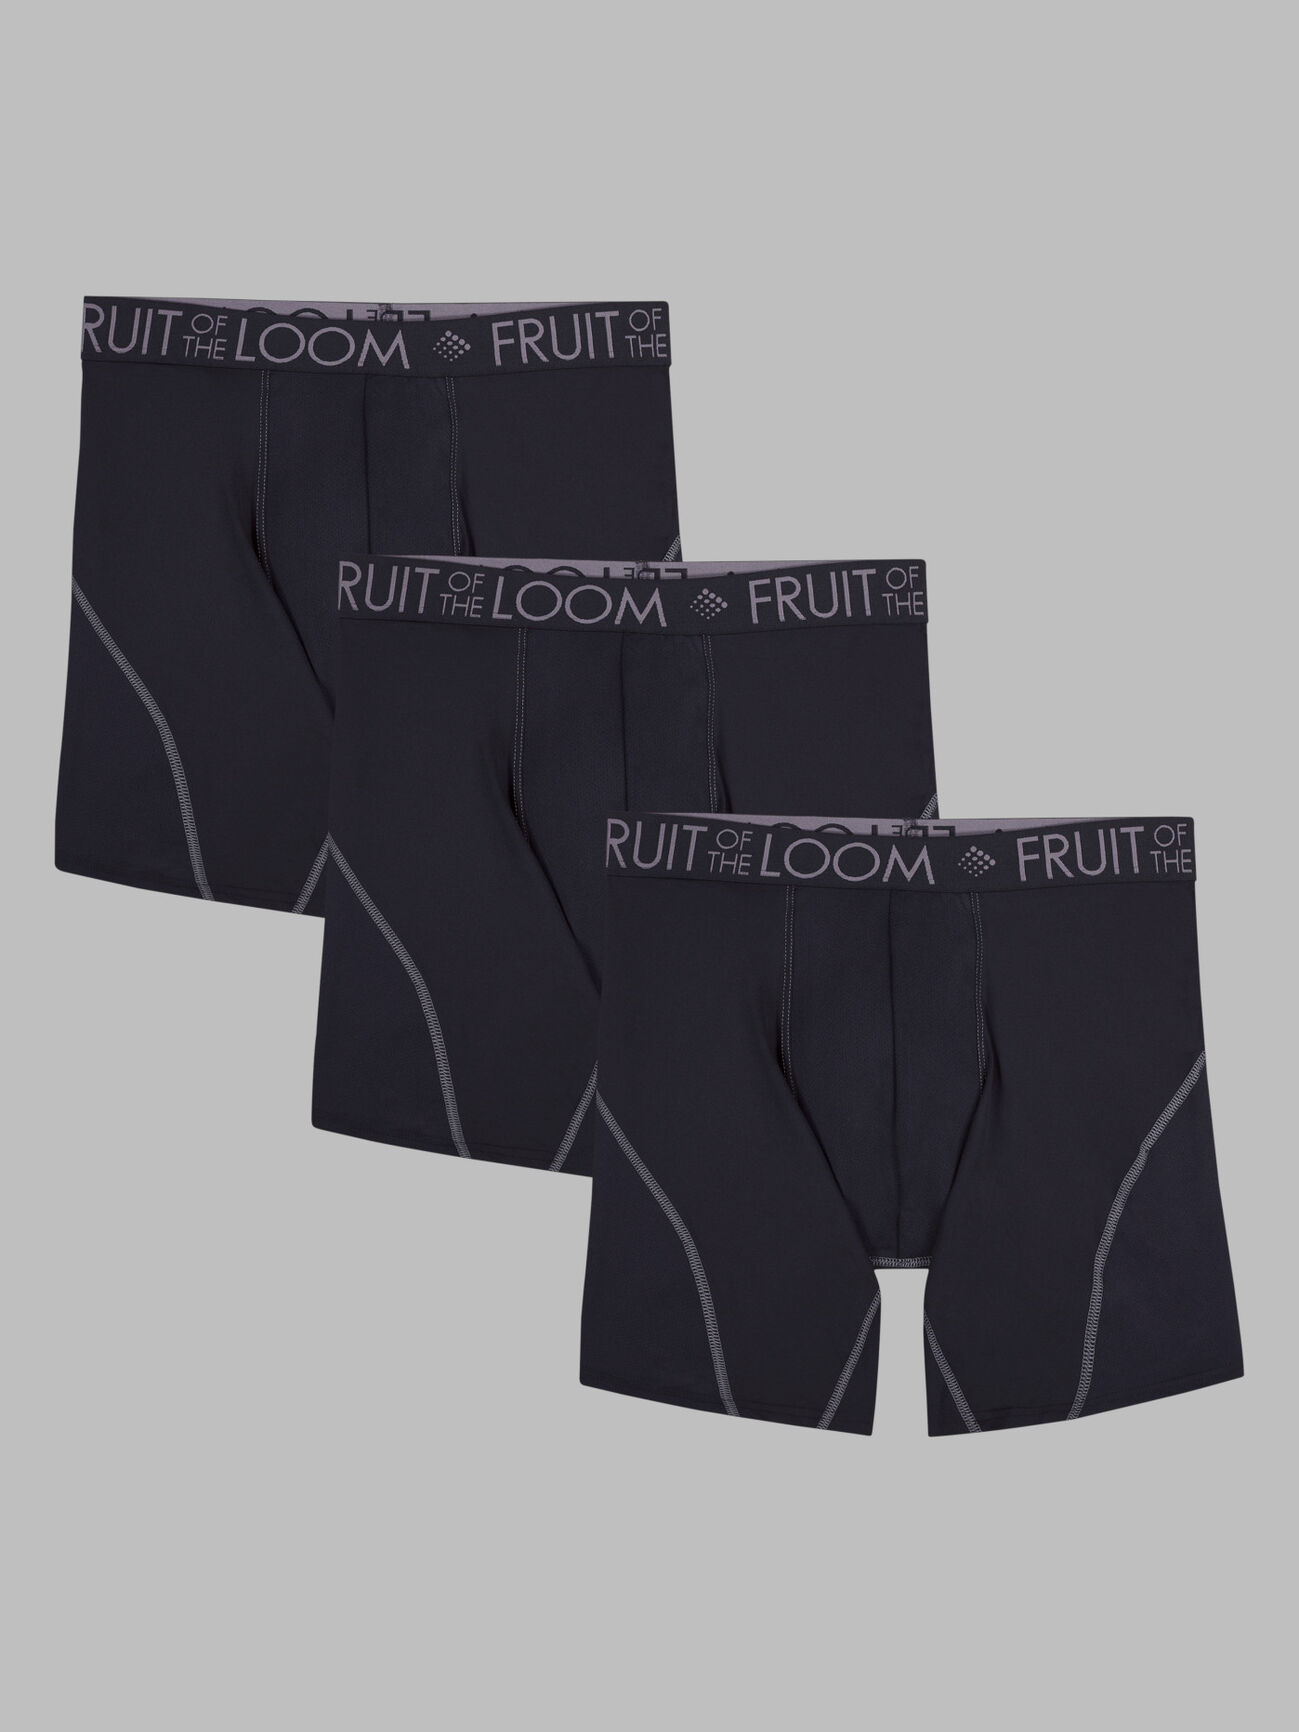 24 Wholesale Men's Fruit Of The Loom 3 Pack Boxer Brief, Size 3xl